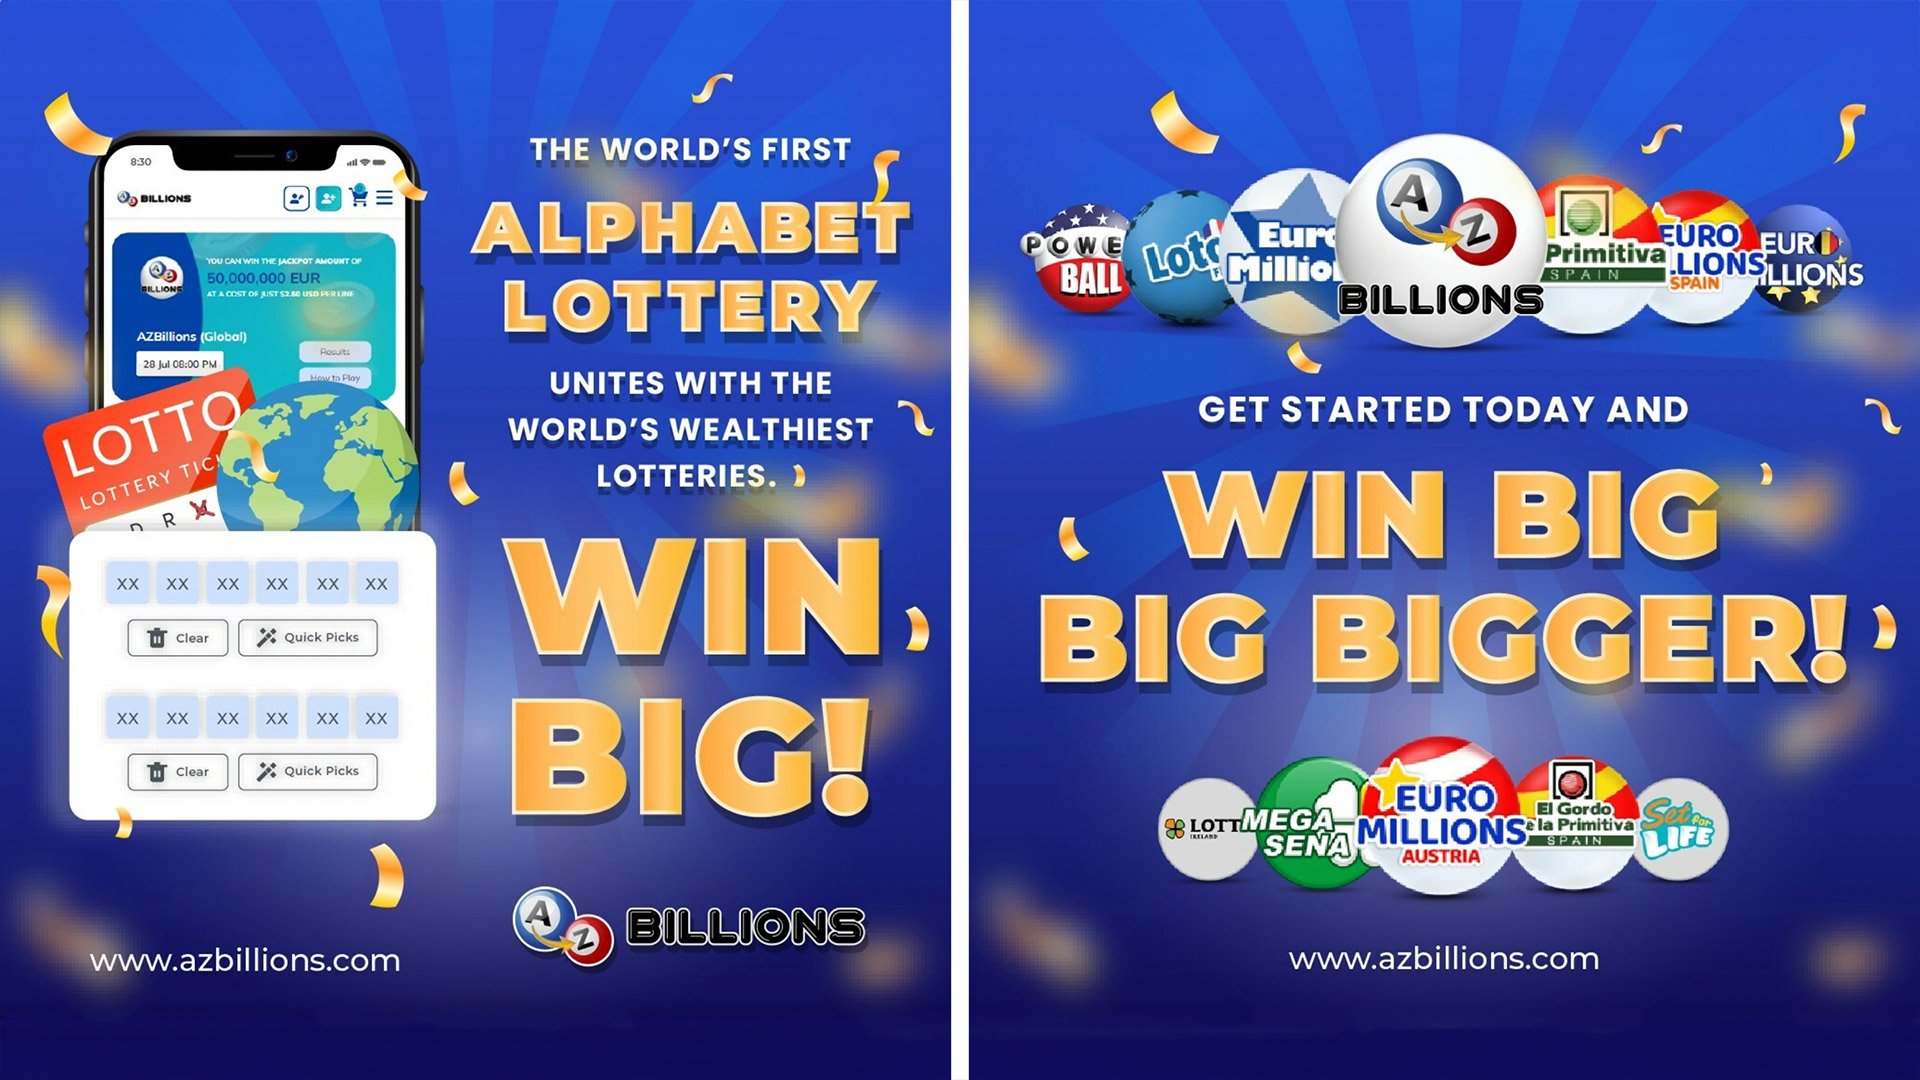 AZBillions launches its Alphabet Lottery app, promises unprecedented gaming experience